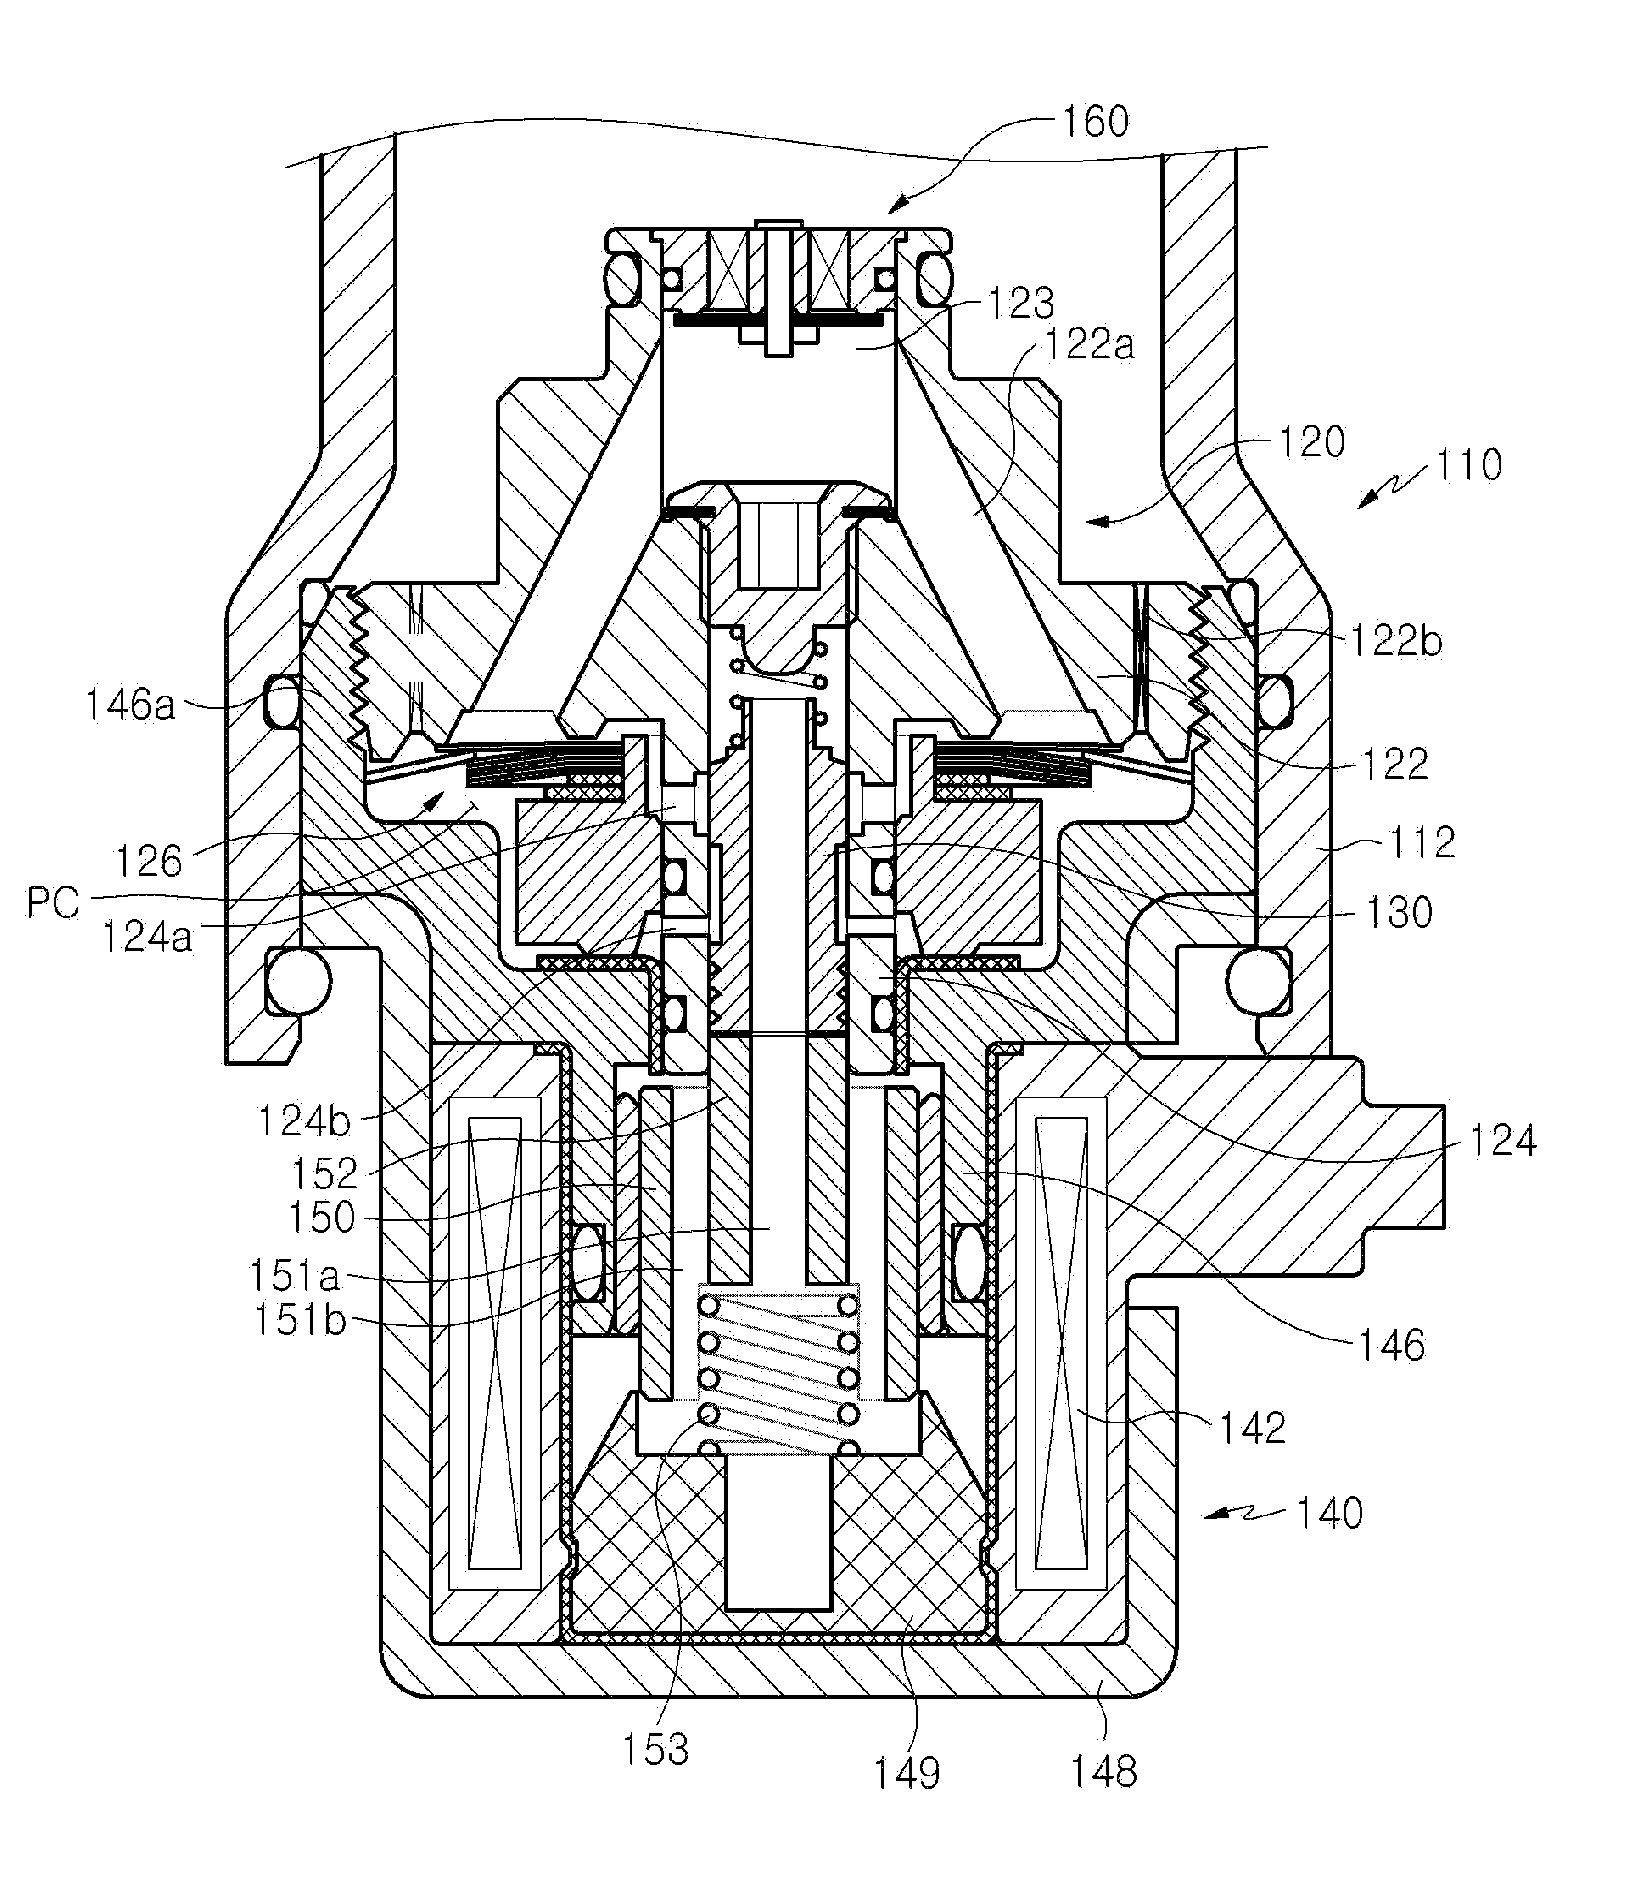 Damping force controlling valve assembly for shock absorber